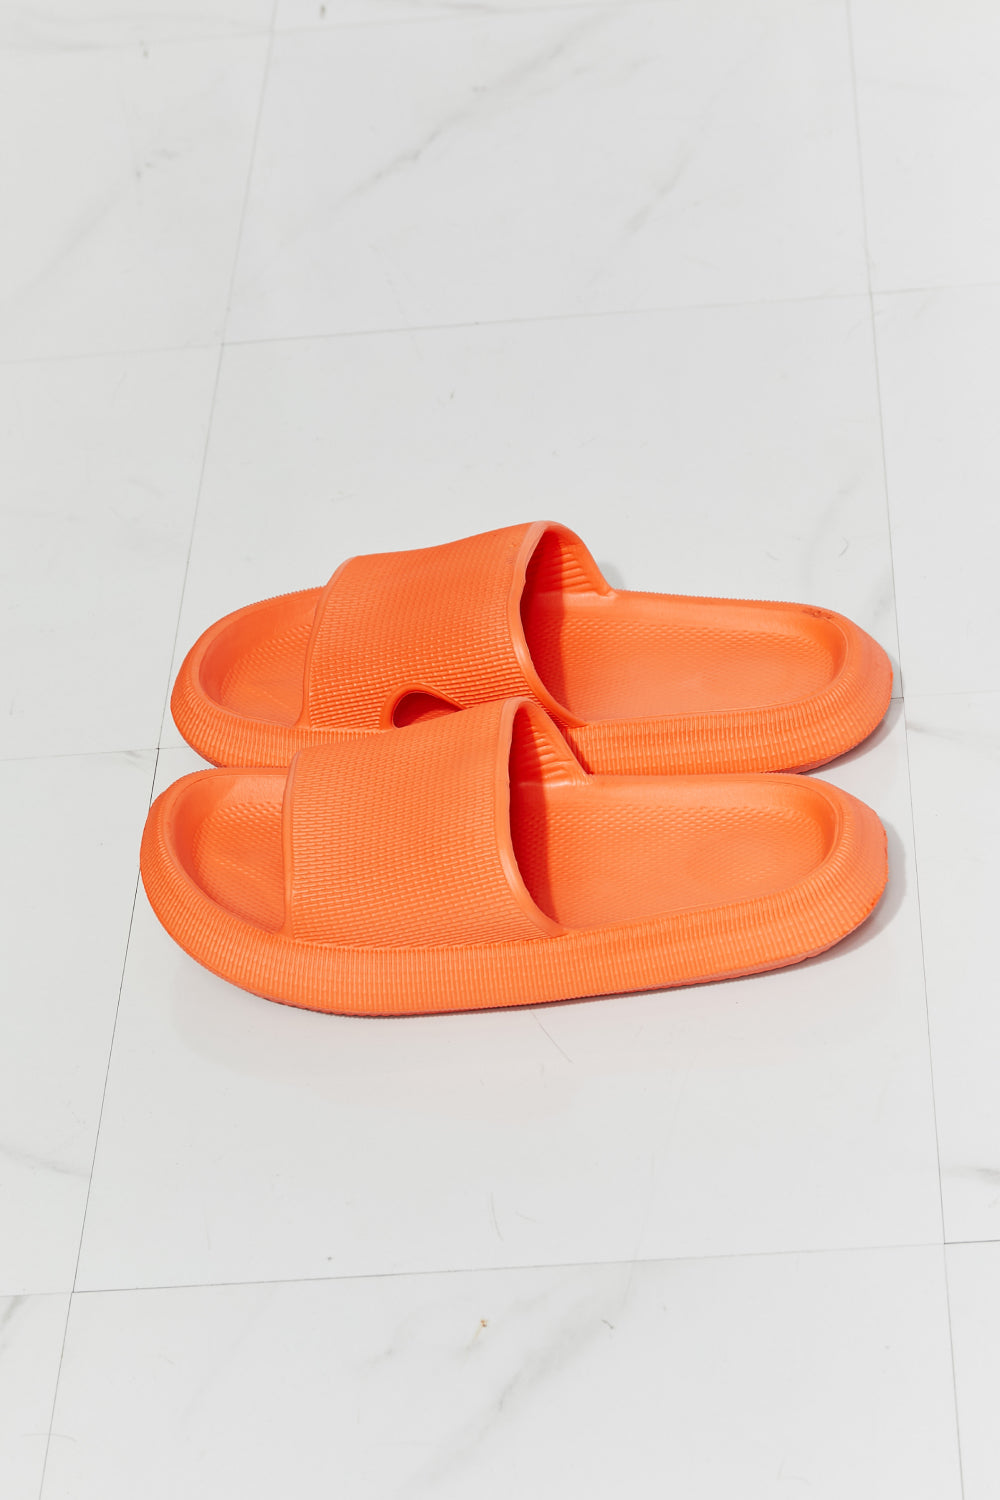 MMShoes Arms Around Me Open Toe Slide in Orange - nailedmoms